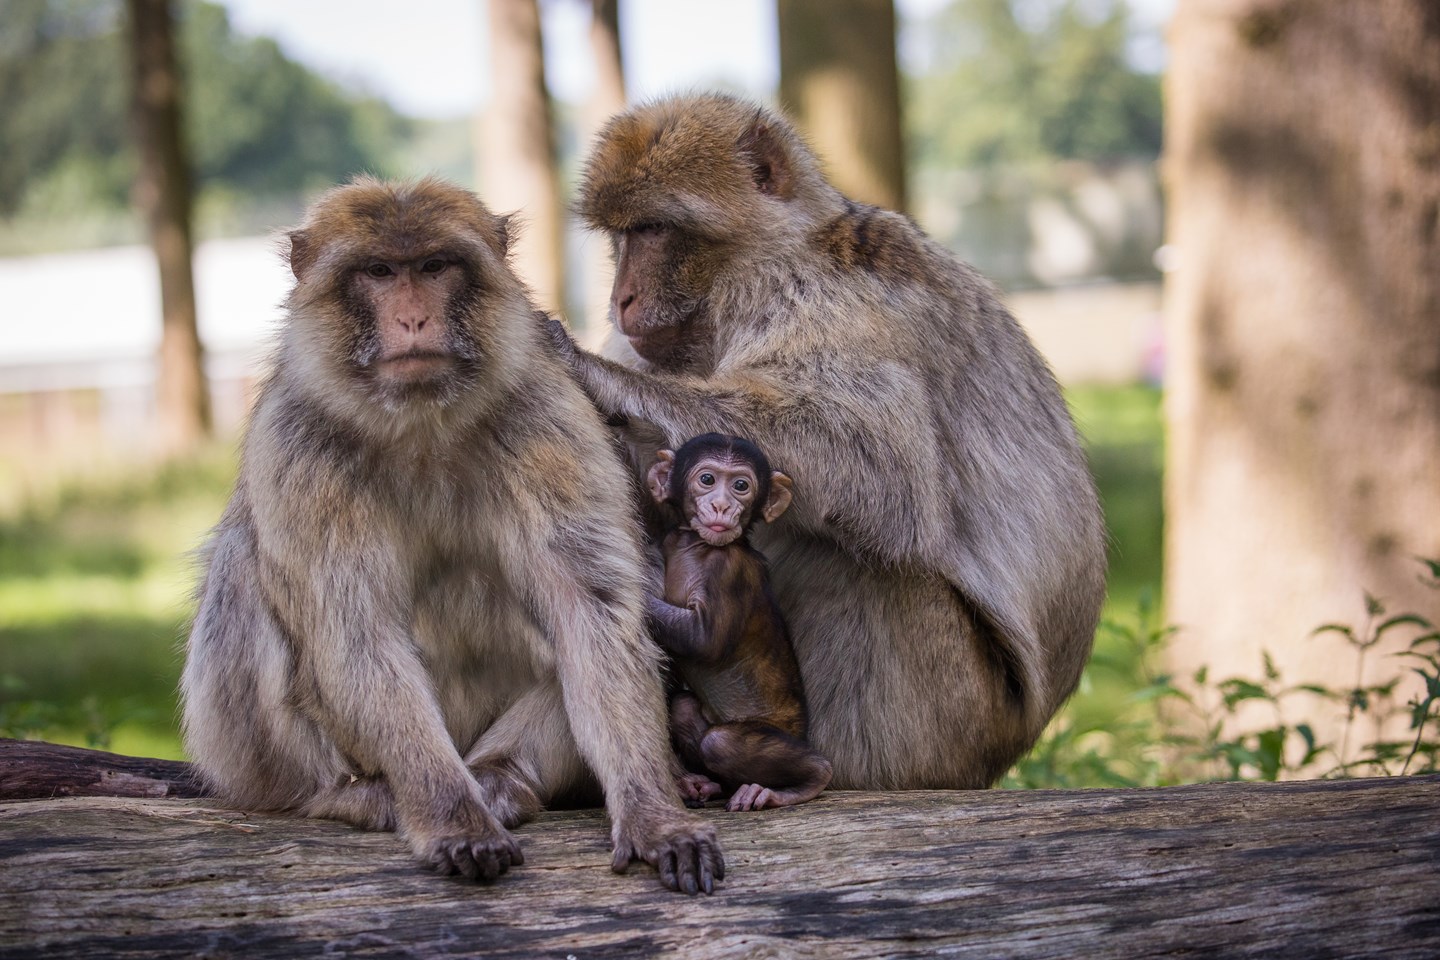 Baby monkey sits between two adults grooming themselves on a log with trees in the background 